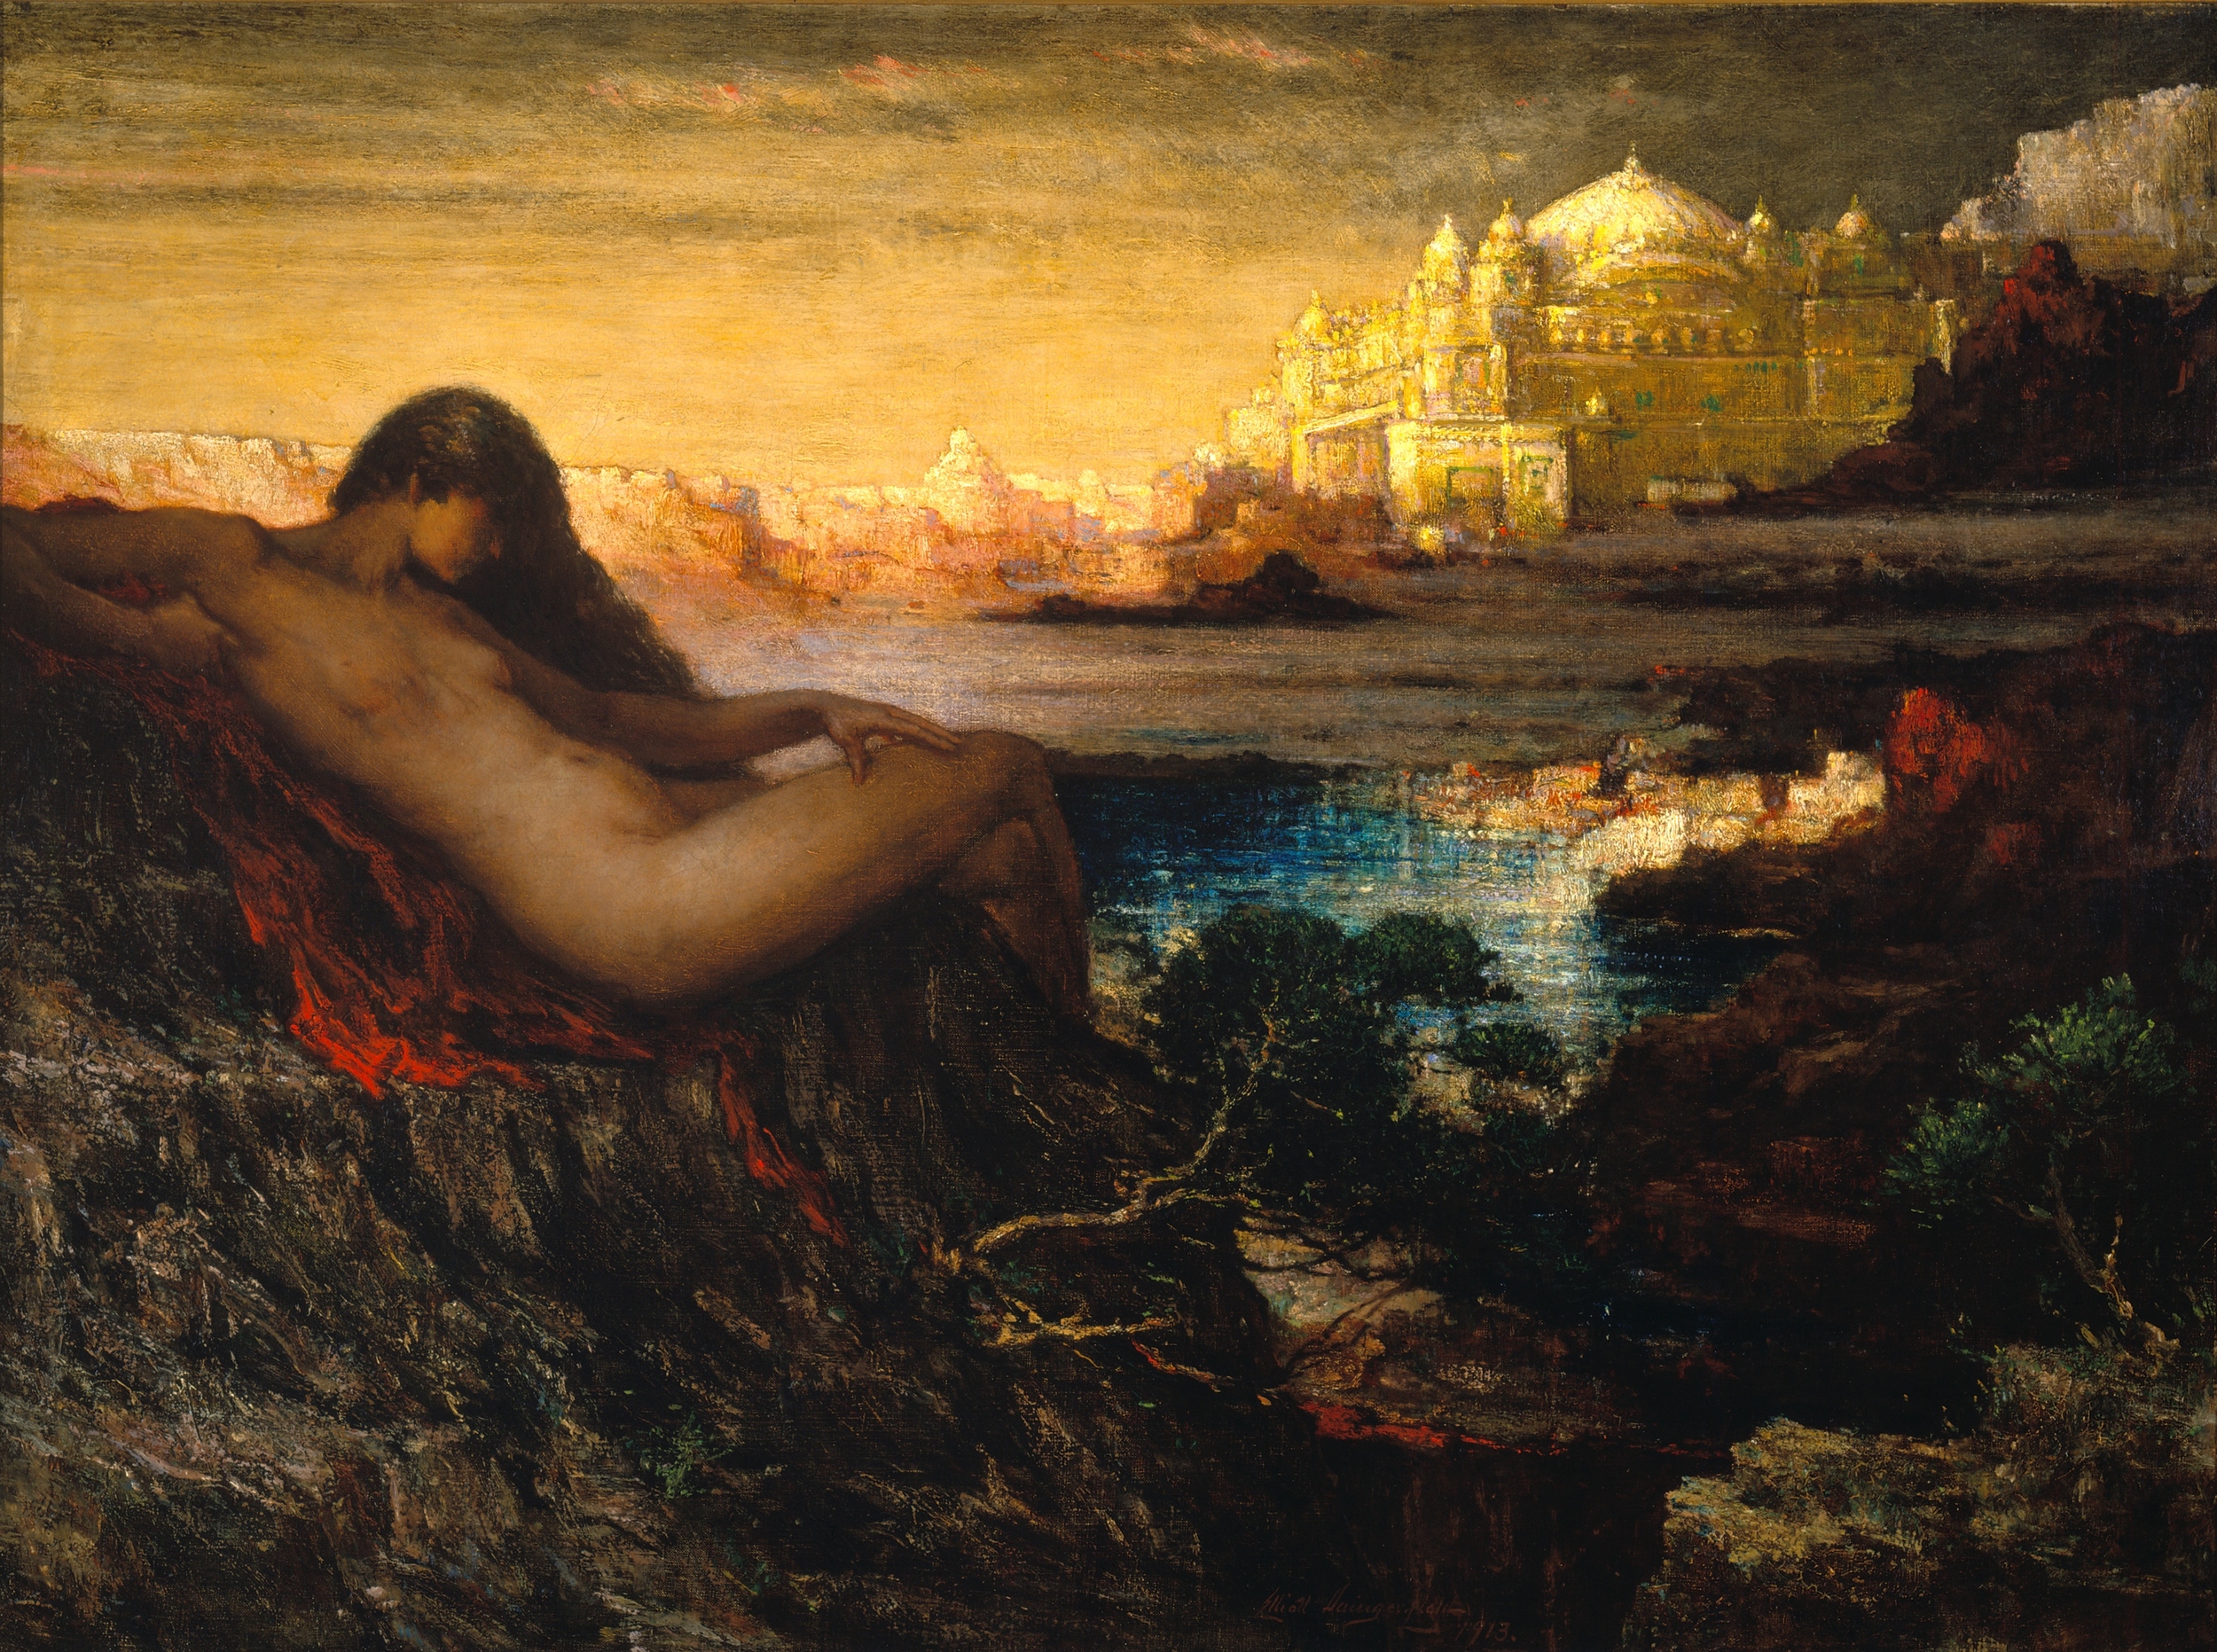 A naked woman on a dark hillside with a golden castle in the background.